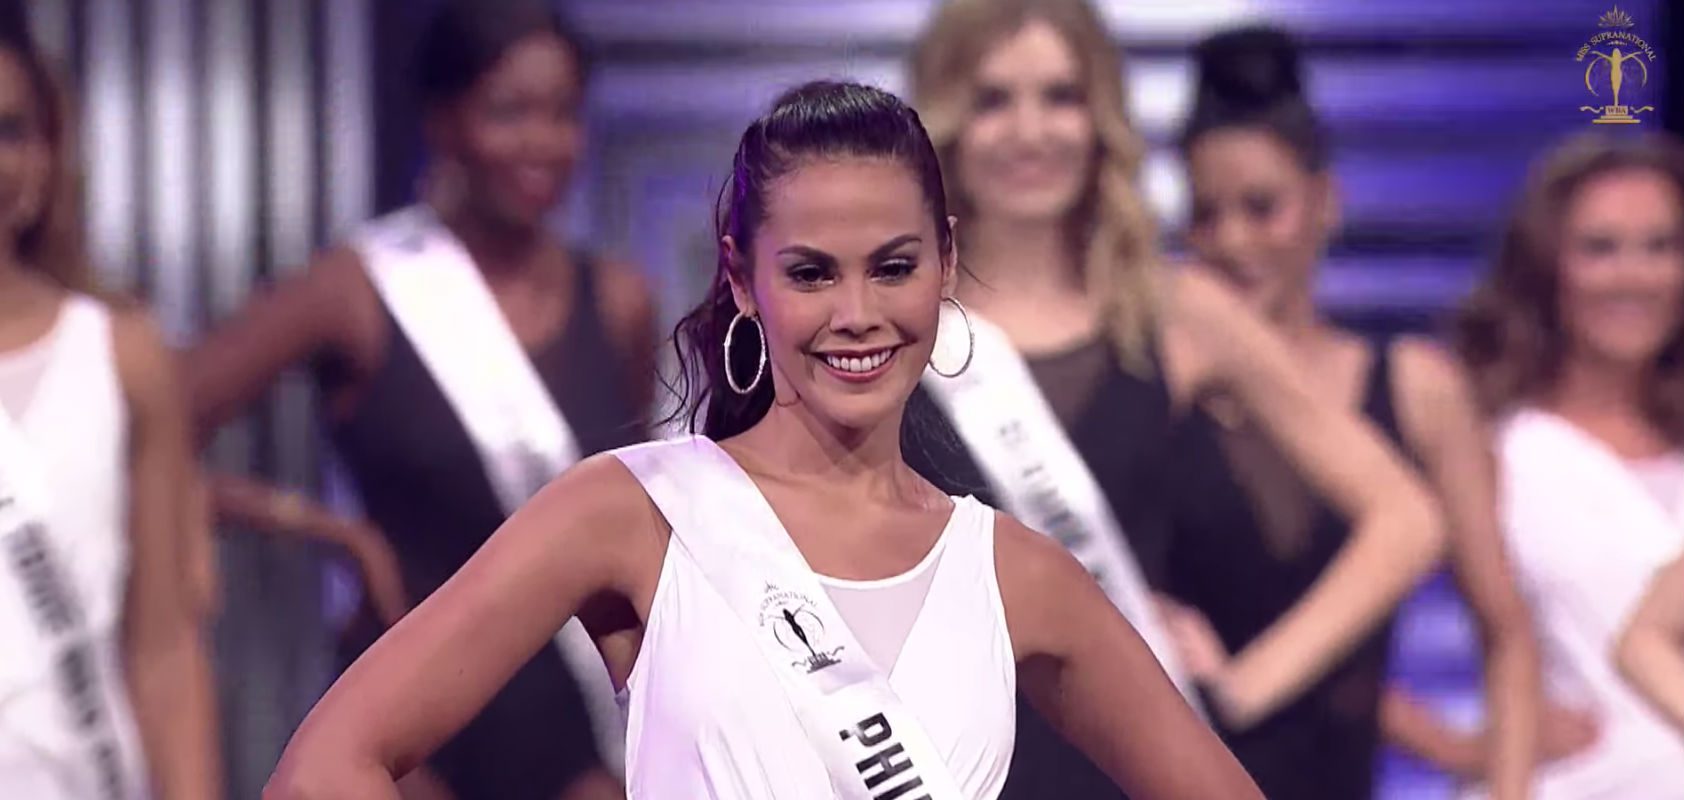 Screengrab from YouTube/Miss Supranational 